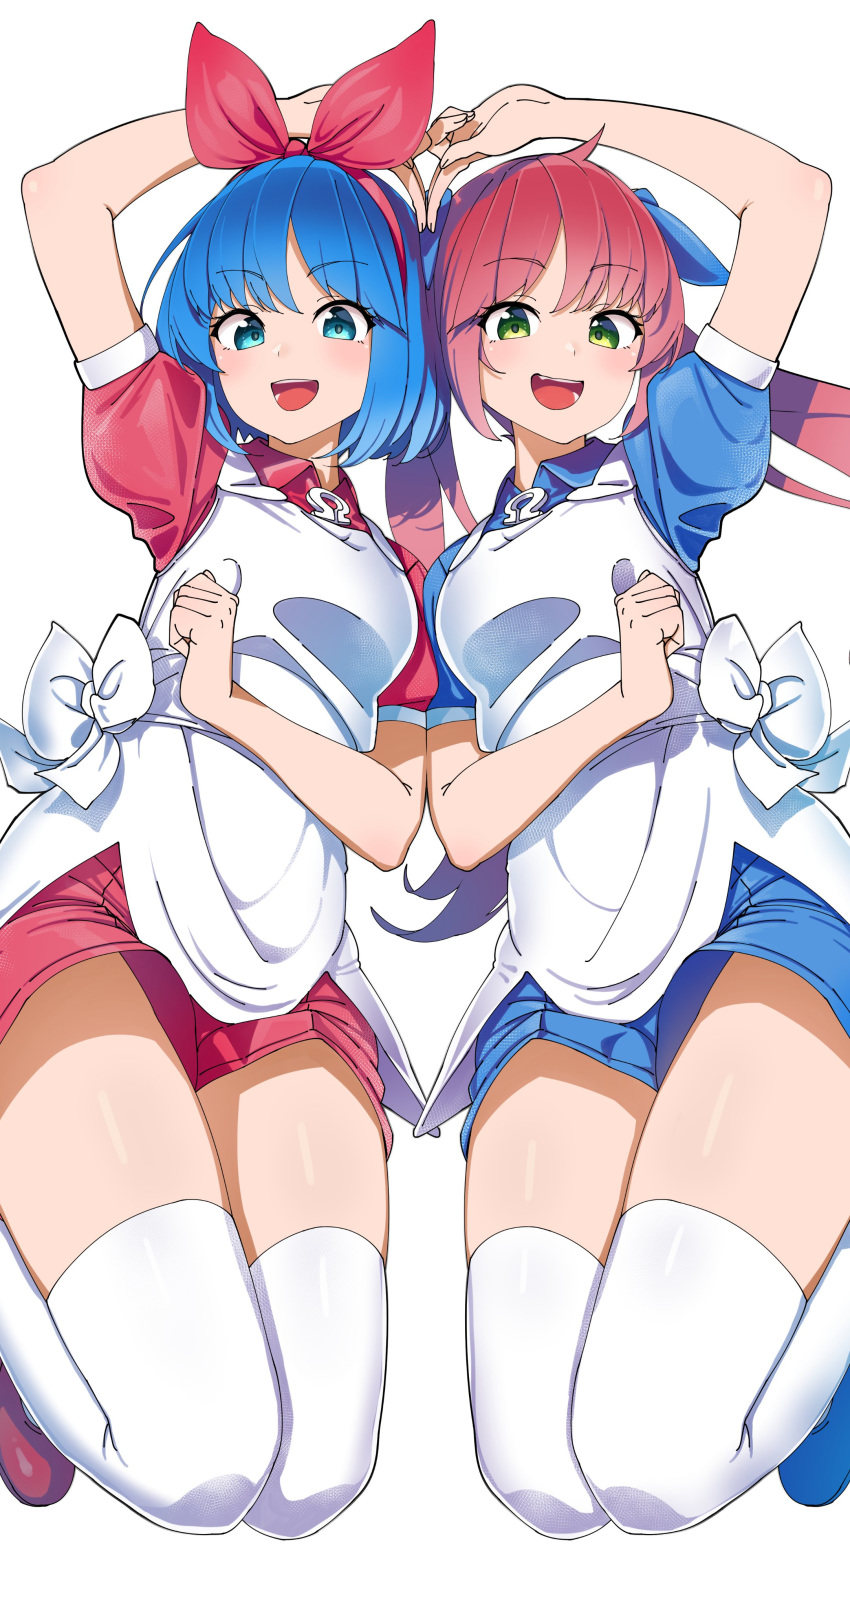 2girls absurdres arm_up bangs blue_eyes blue_hair blue_ribbon blue_shirt blue_shorts bow bow_hairband eyebrows_visible_through_hair green_eyes hair_bow hair_ribbon hairband heart_arms heart_arms_duo highres long_hair multiple_girls omega_rei omega_rio omega_sisters omega_symbol open_mouth pink_hair puffy_short_sleeves puffy_sleeves red_hairband red_ribbon red_shirt red_shorts ribbon shinomu_(cinomoon) shirt short_hair short_shorts short_sleeves shorts simple_background smile thighhighs twintails virtual_youtuber white_background white_legwear